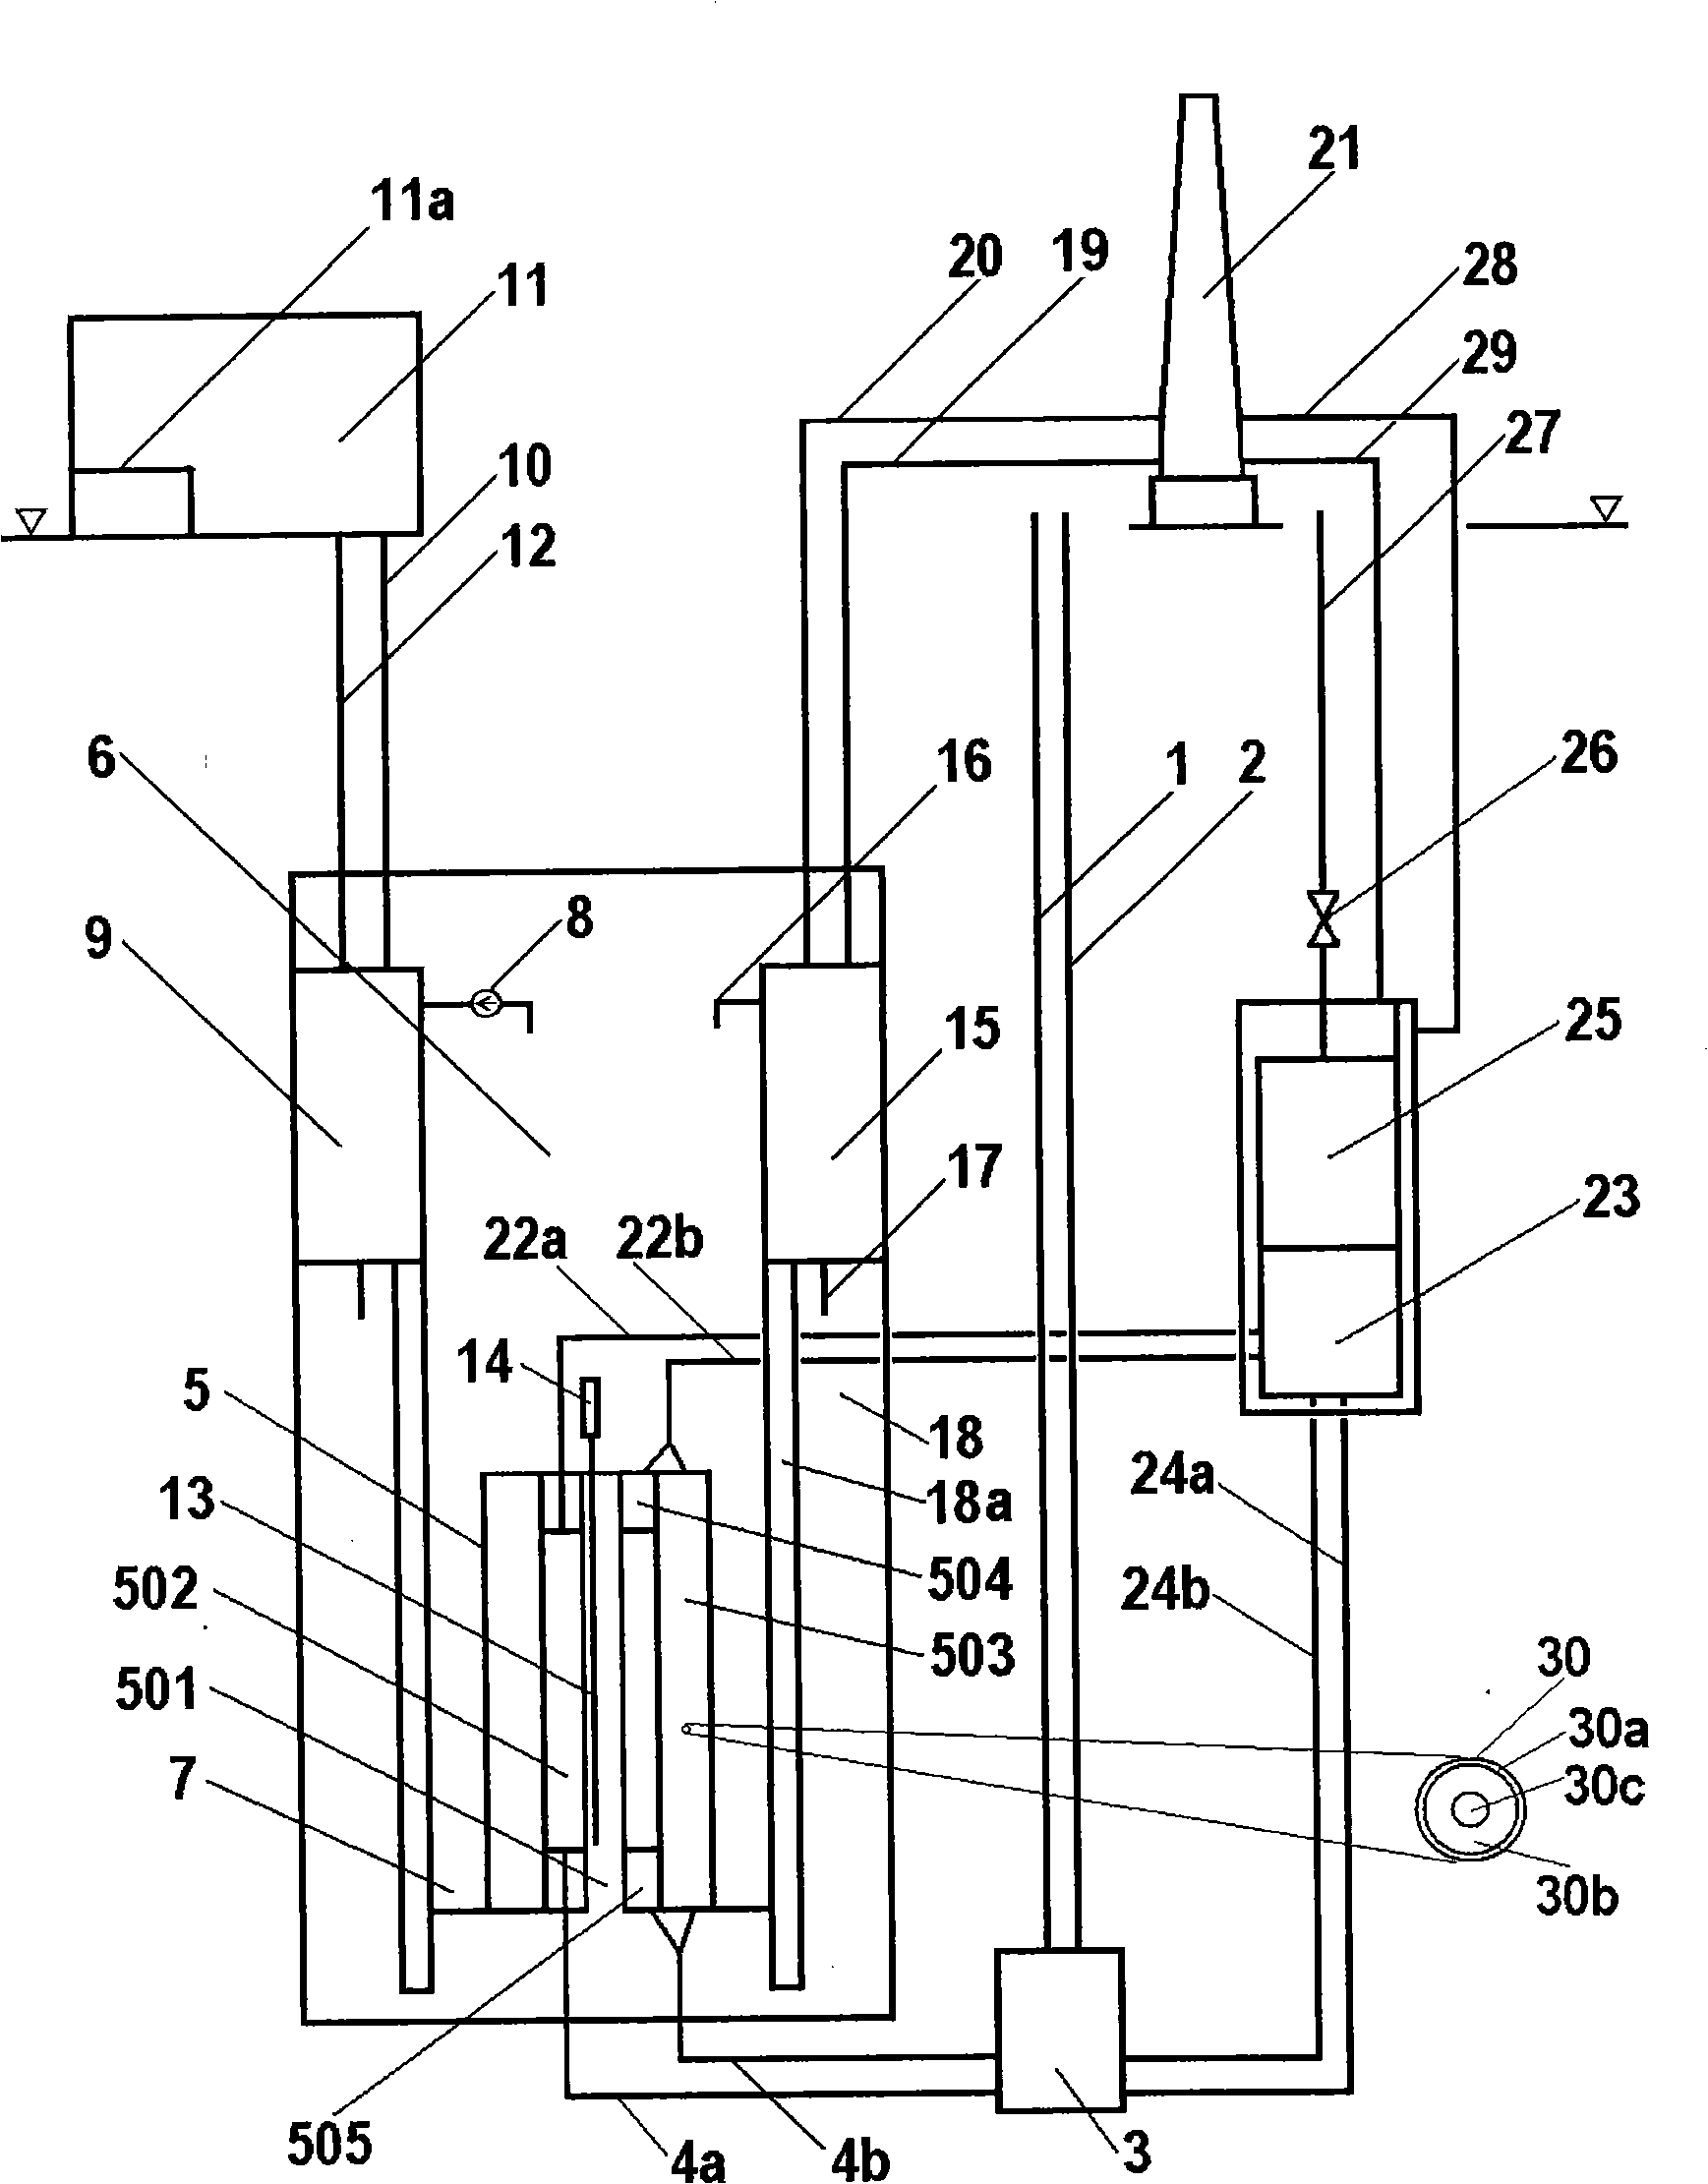 Method and device for fast breeding and converting nuclear fuel